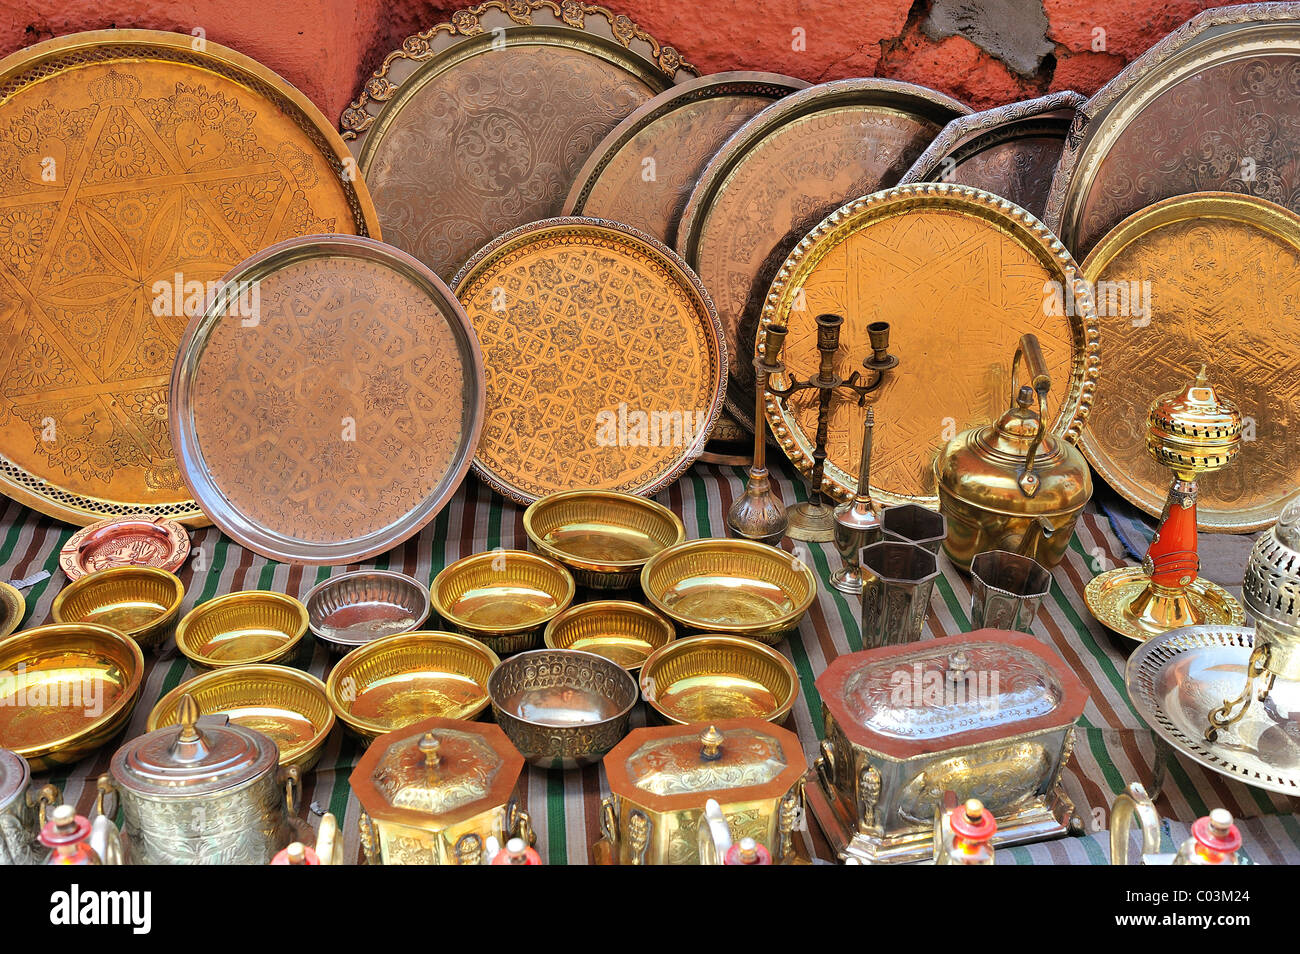 Artfully engraved brass plates and vessels being sold at the souk markets or bazaar, Marrakech, Morocco, Africa Stock Photo